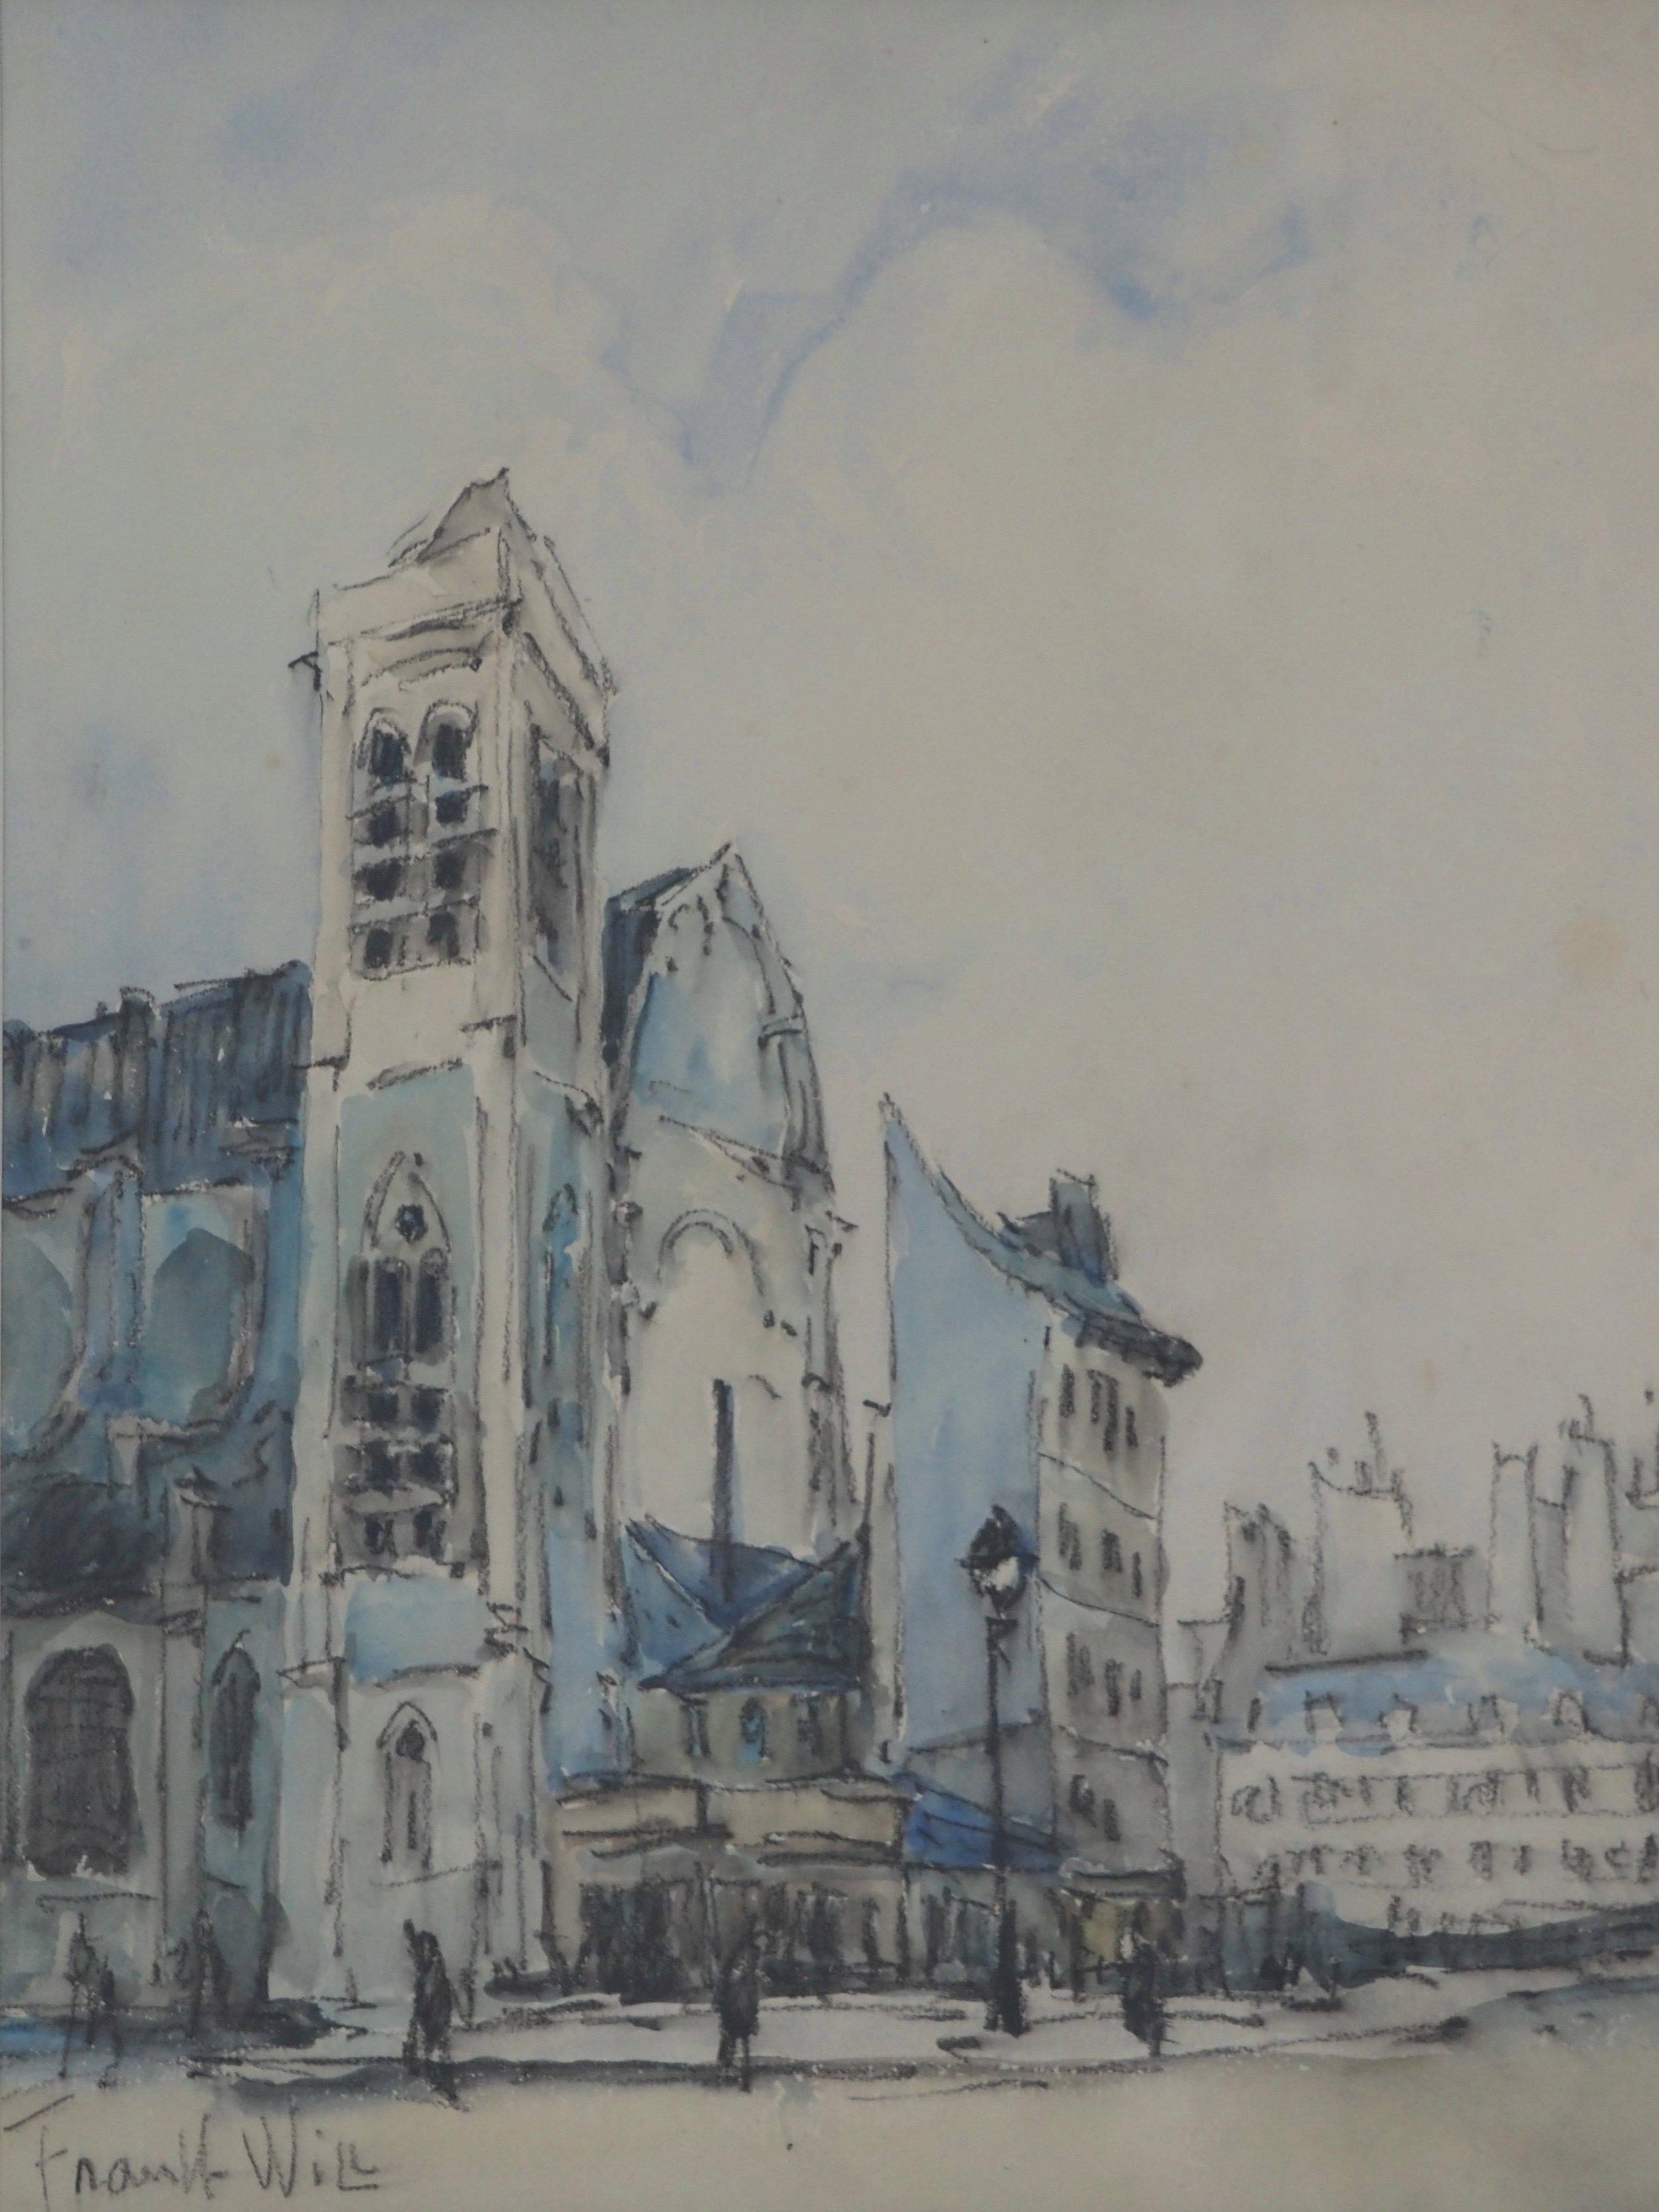 Old Church in Paris - Original Watercolor, Signed - Modern Art by Frank Will